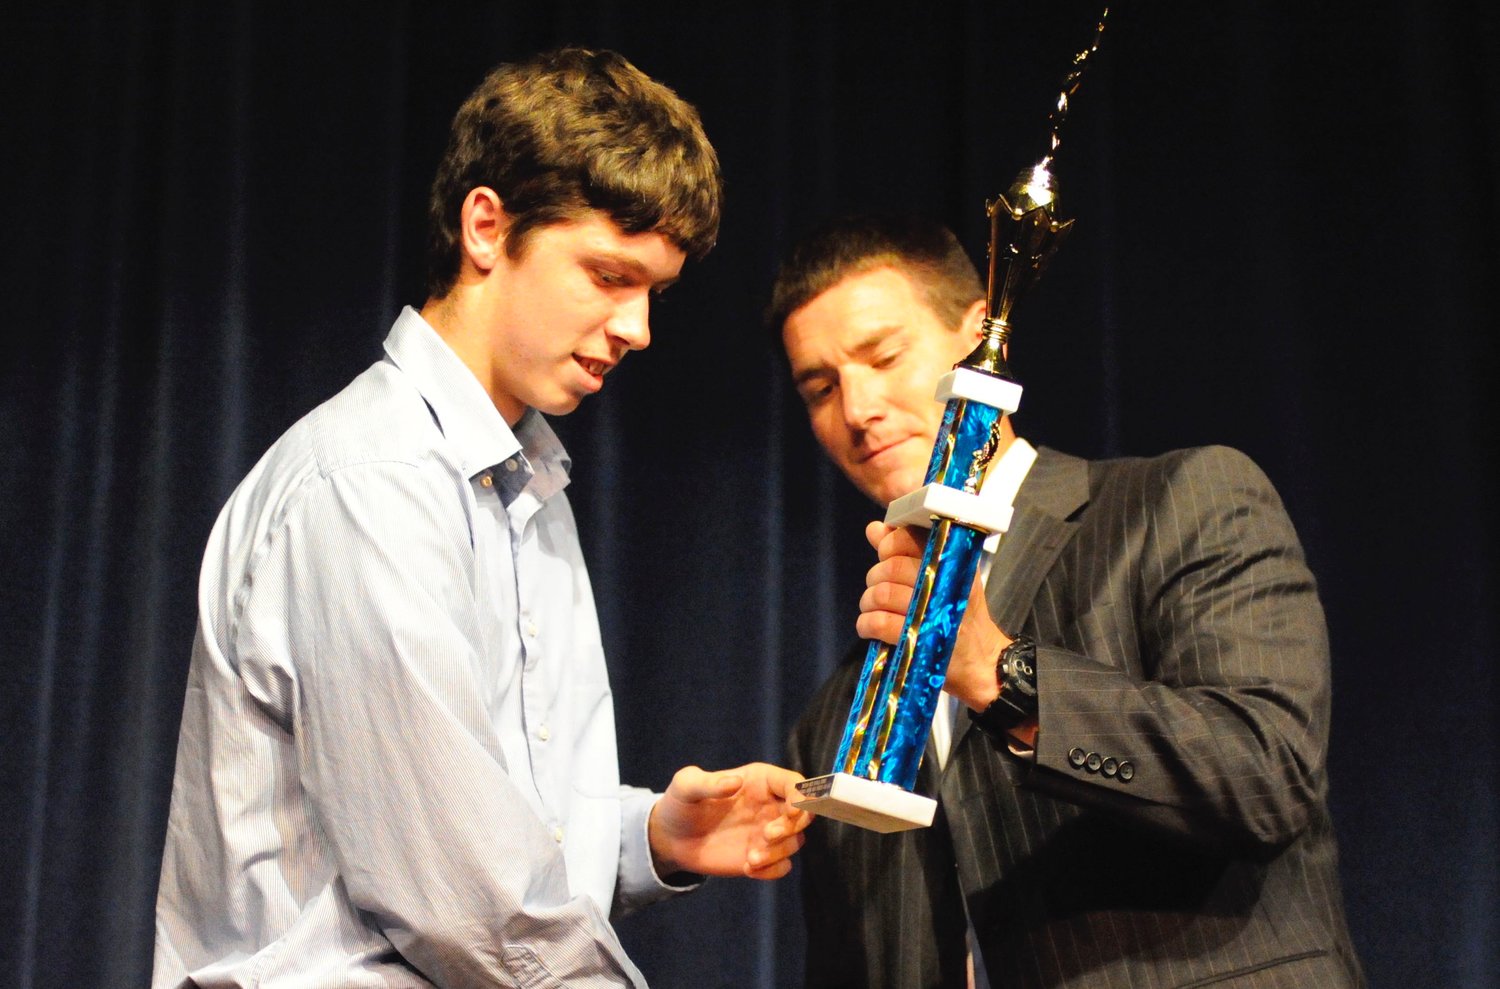 Dave Eggleton, Sullivan West’s new athletic director, presents a trophy to Kyle Reimer, one of the Bulldogs multi-sports star scholar-athletes during the spring 2019 sports awards ceremony.